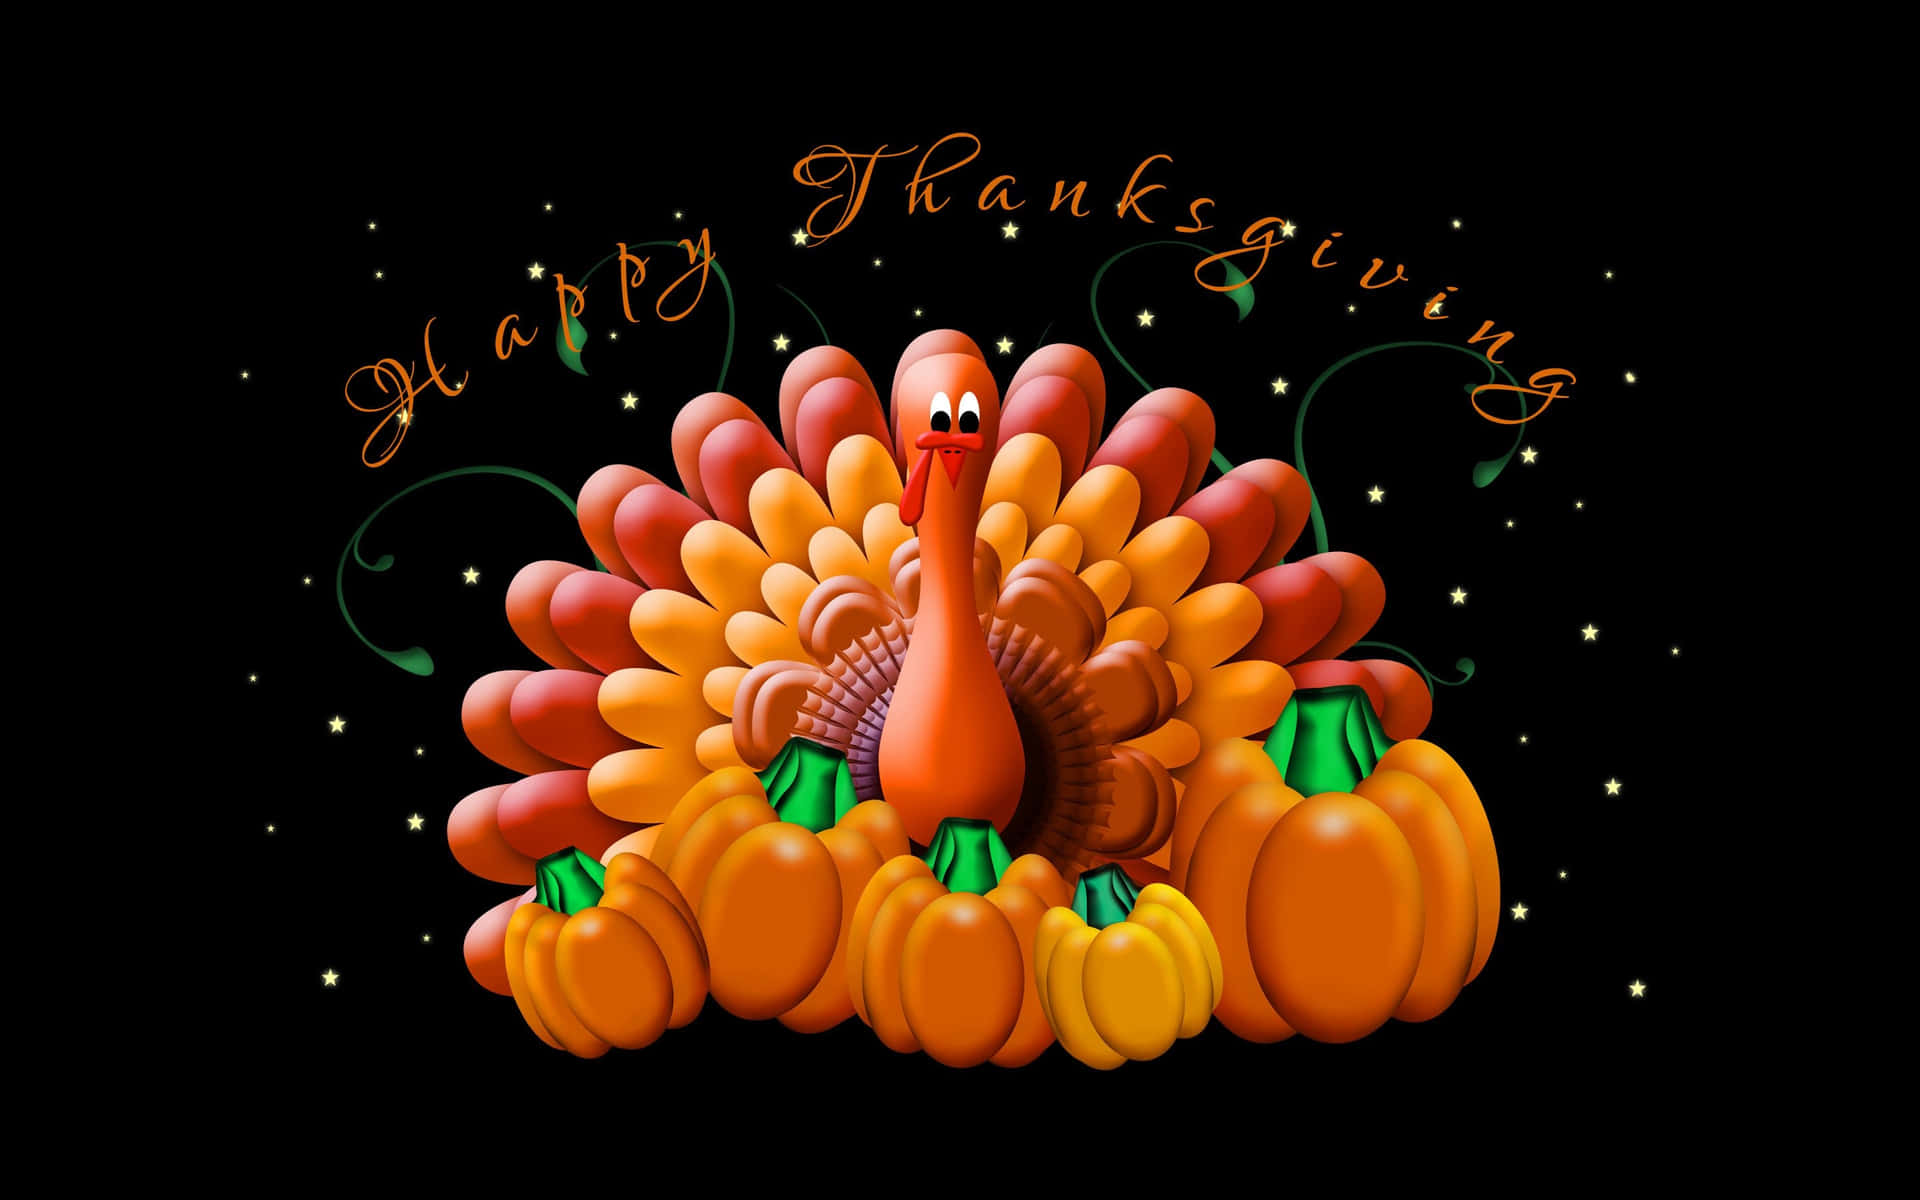 Happy Thanksgiving Animated Turkey With Pumpkins Background